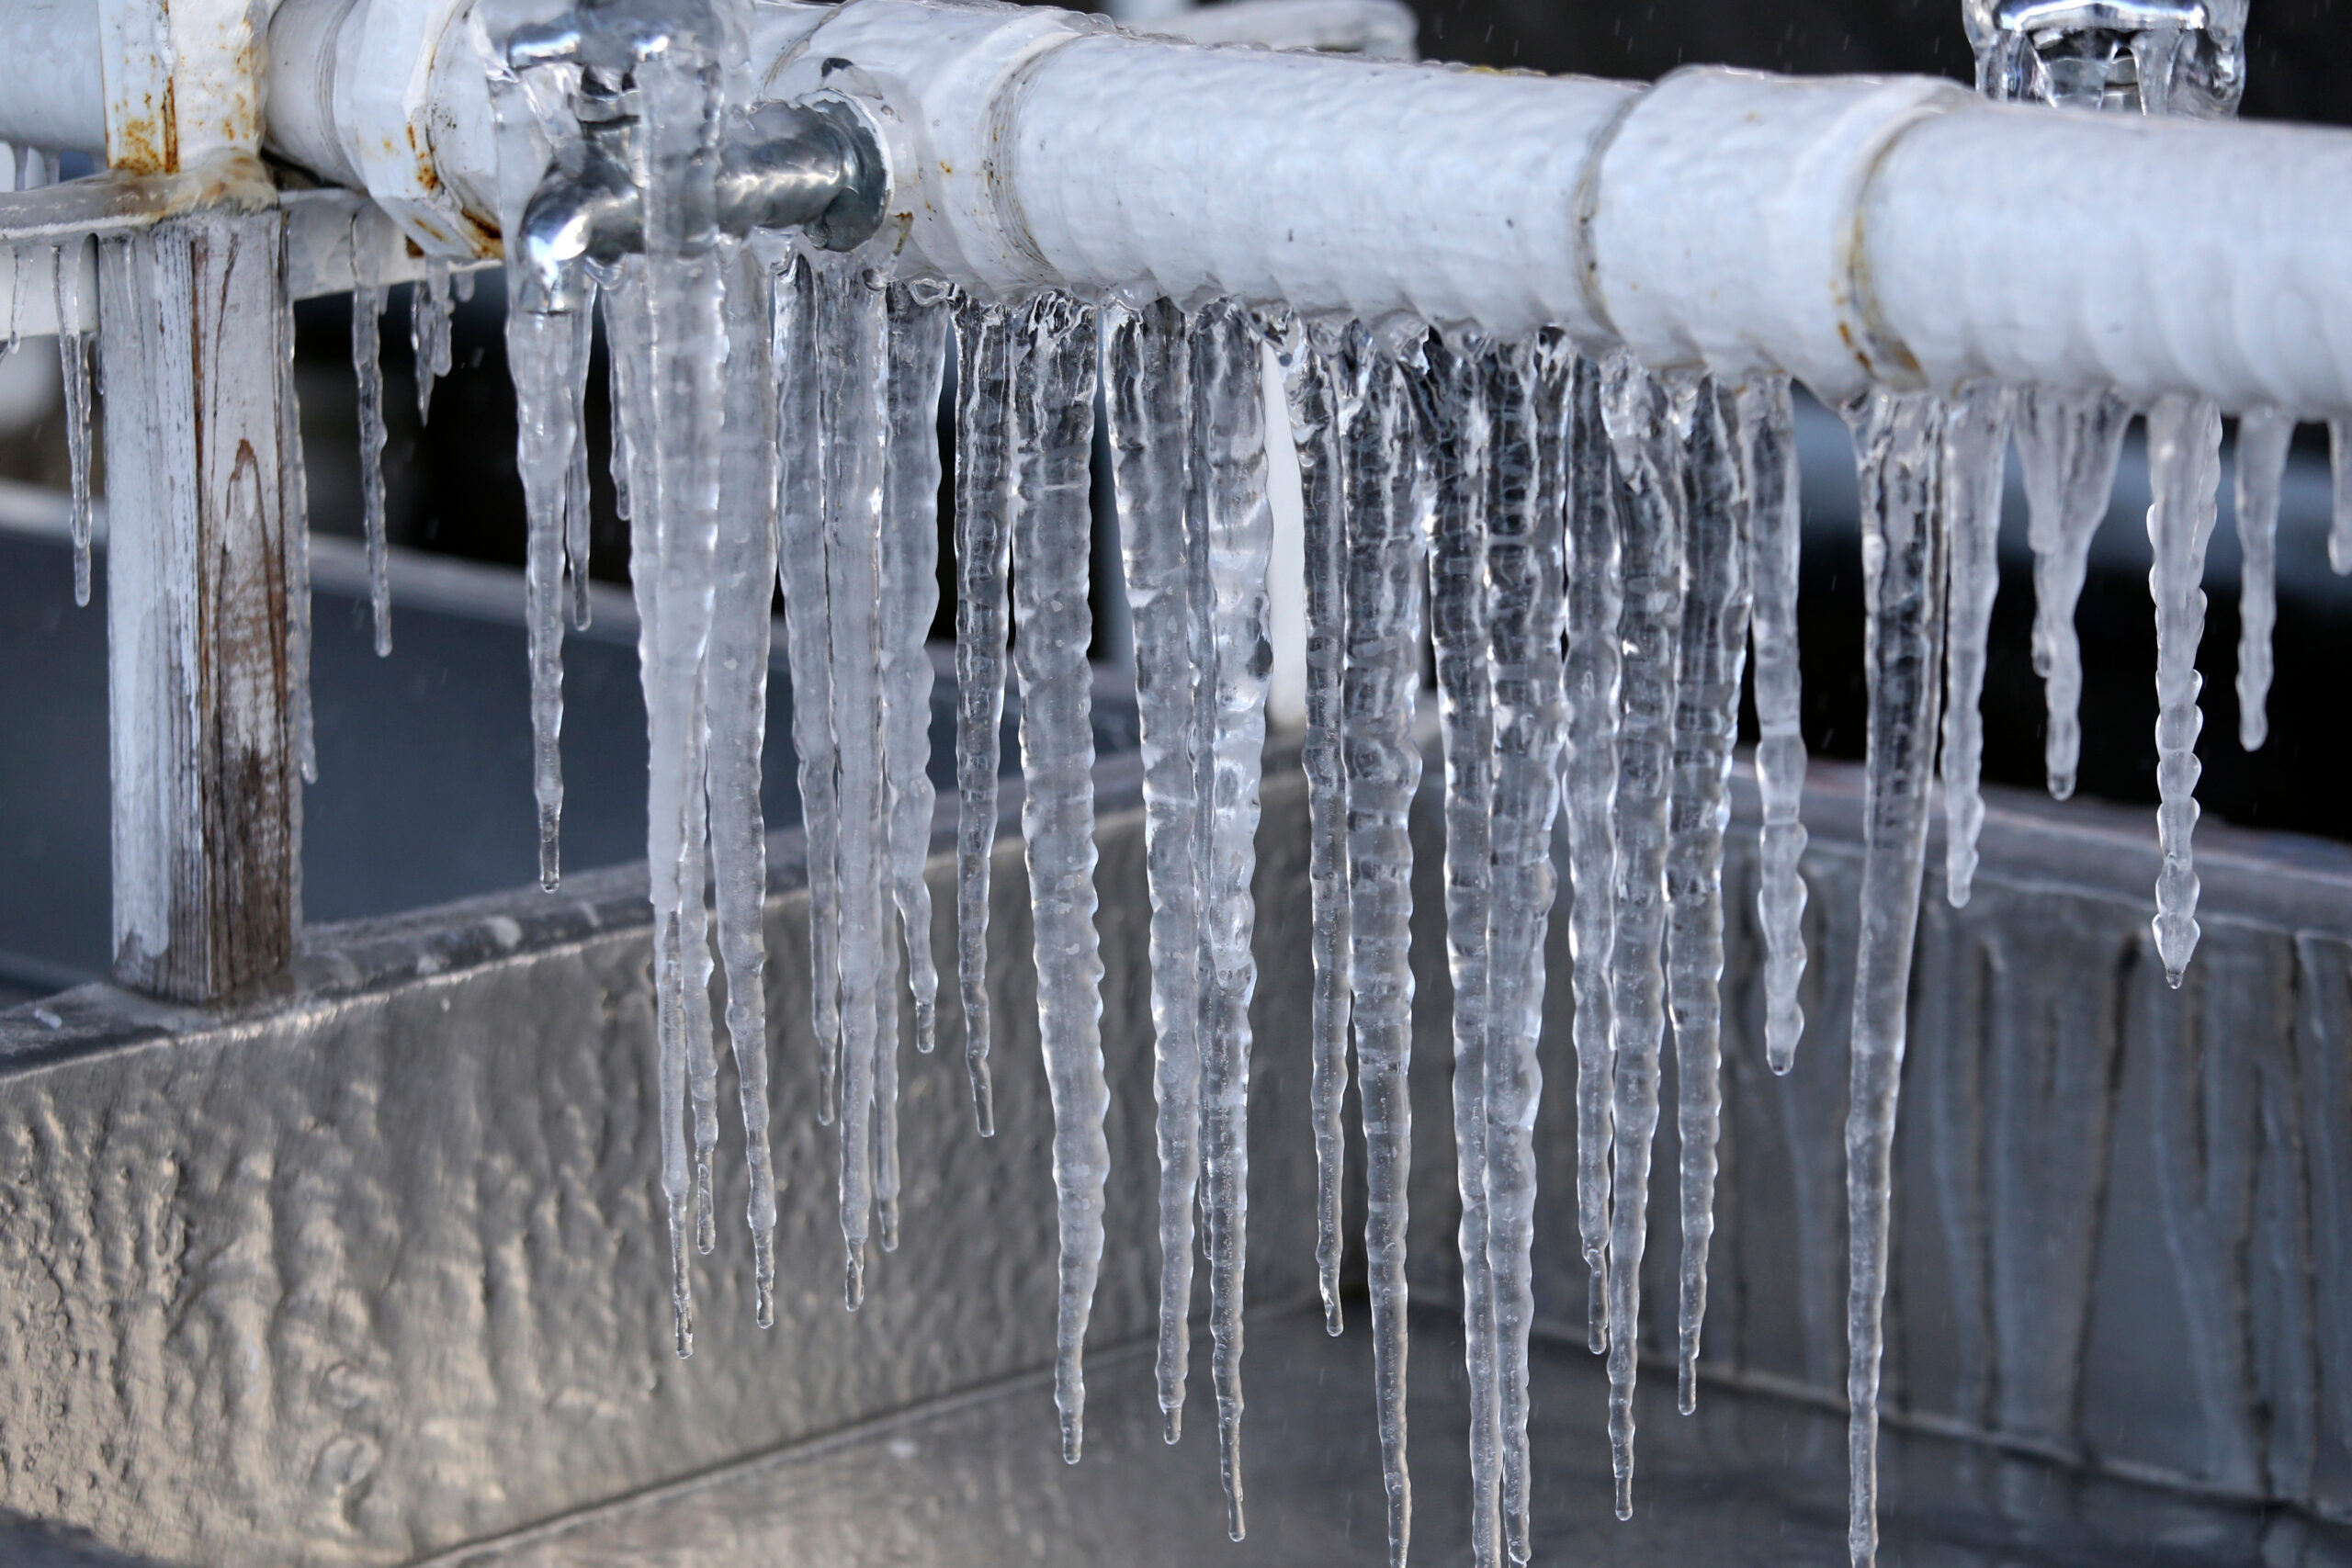 Frozen pipes and spigot with icicles